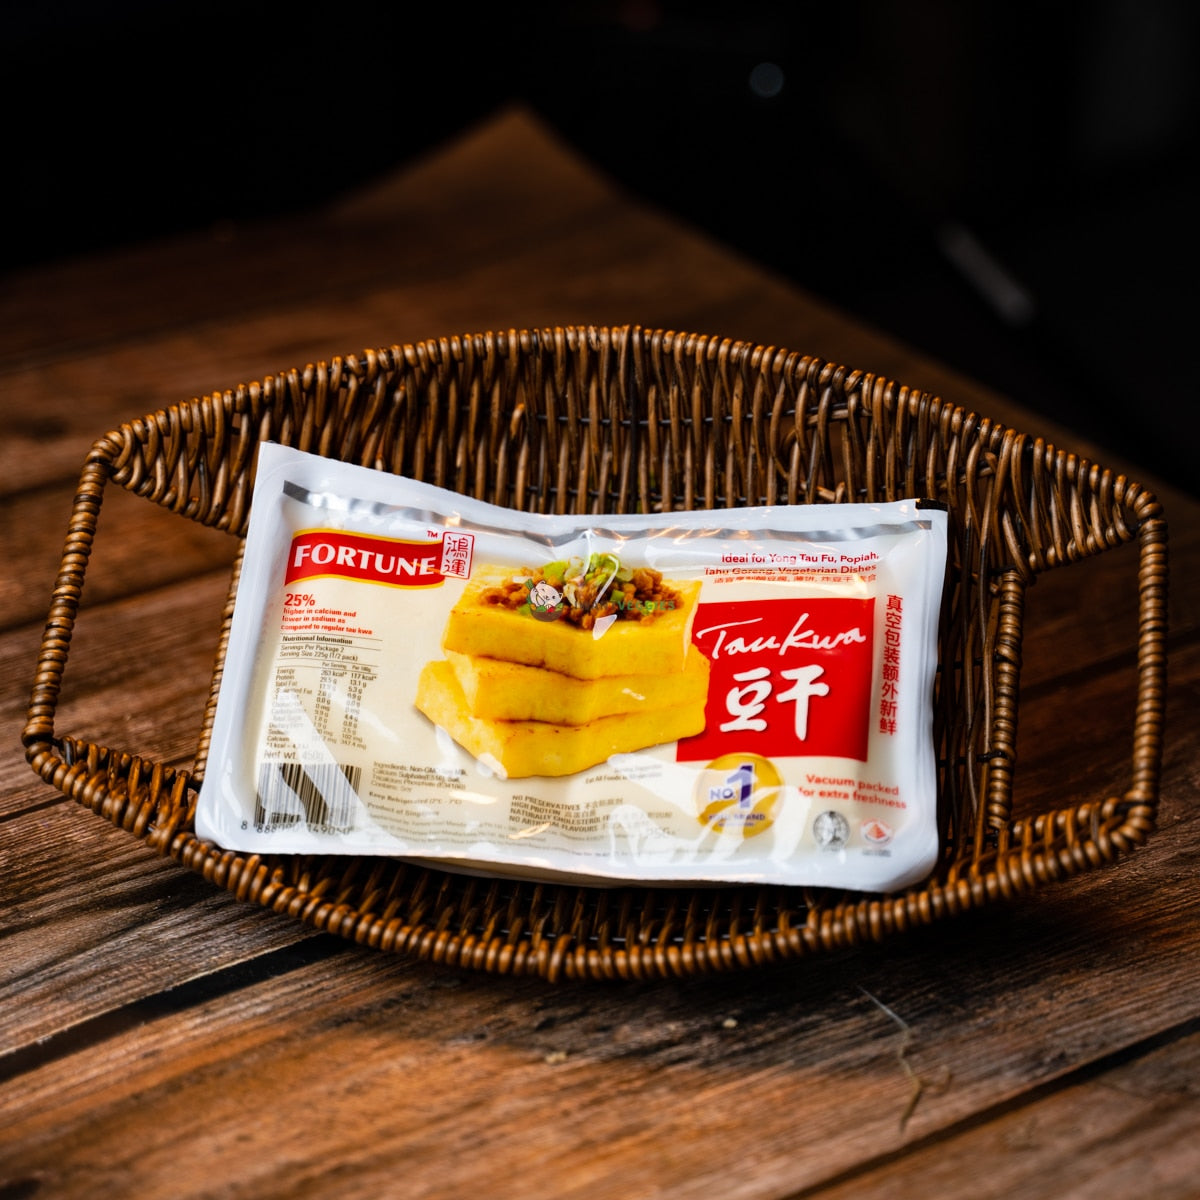 A packet of Fortune tau kwa on a wooden basket. It is a firm tau kwa with a fried and rough texture. It is ready to eat, serve warm or microwave.